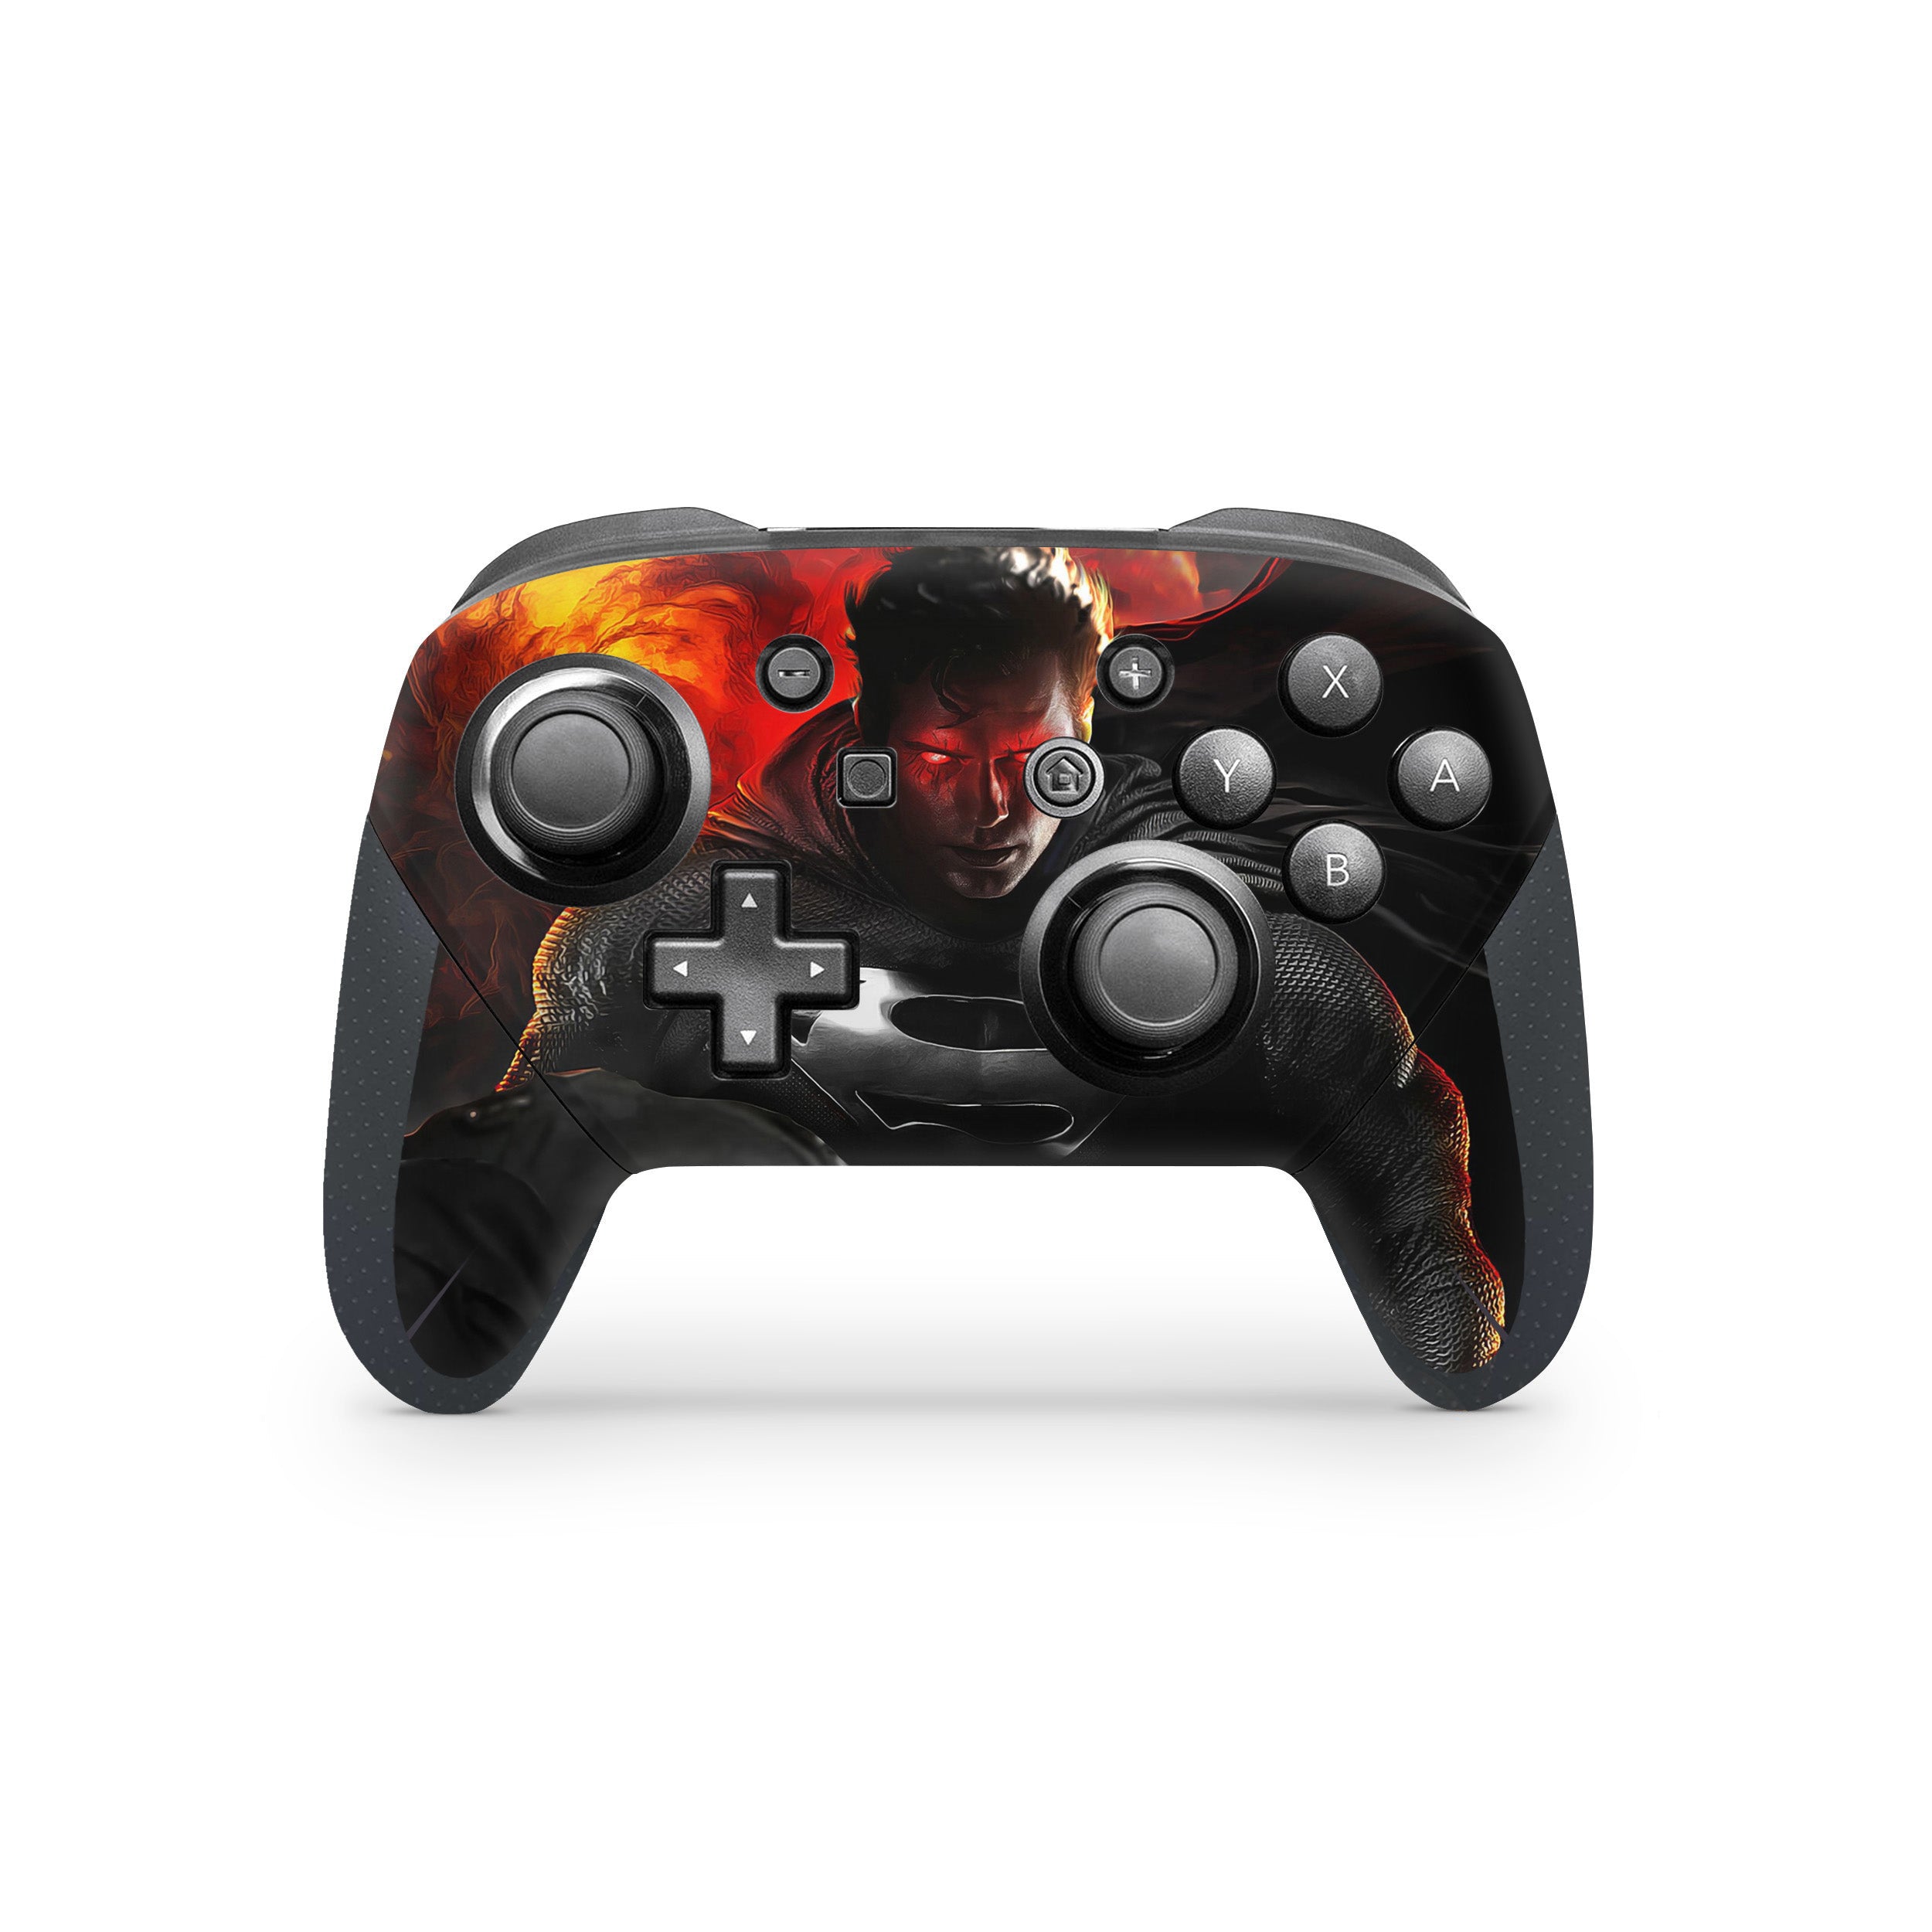 A video game skin featuring a DC Comics Superman design for the Switch Pro Controller.